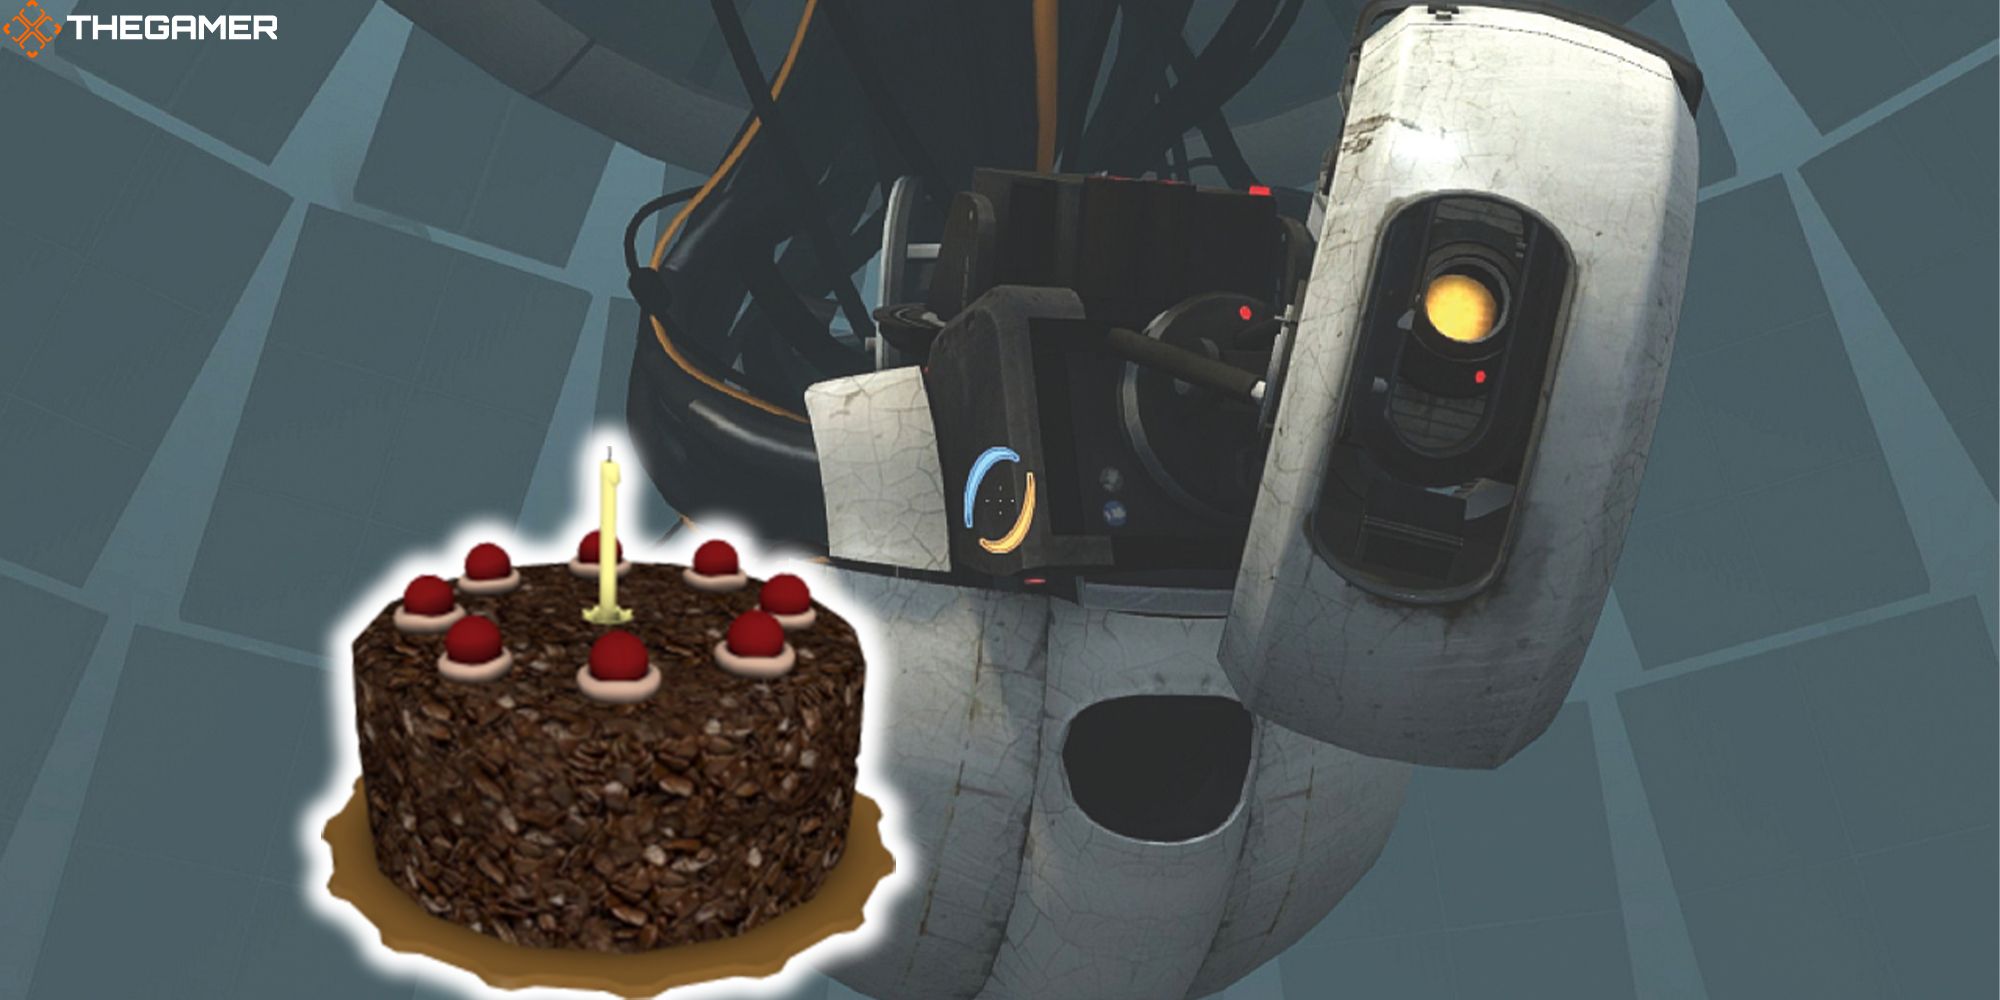 GLaDOS hovers next to a chocolate cake topped with berries. Custom image for TG.